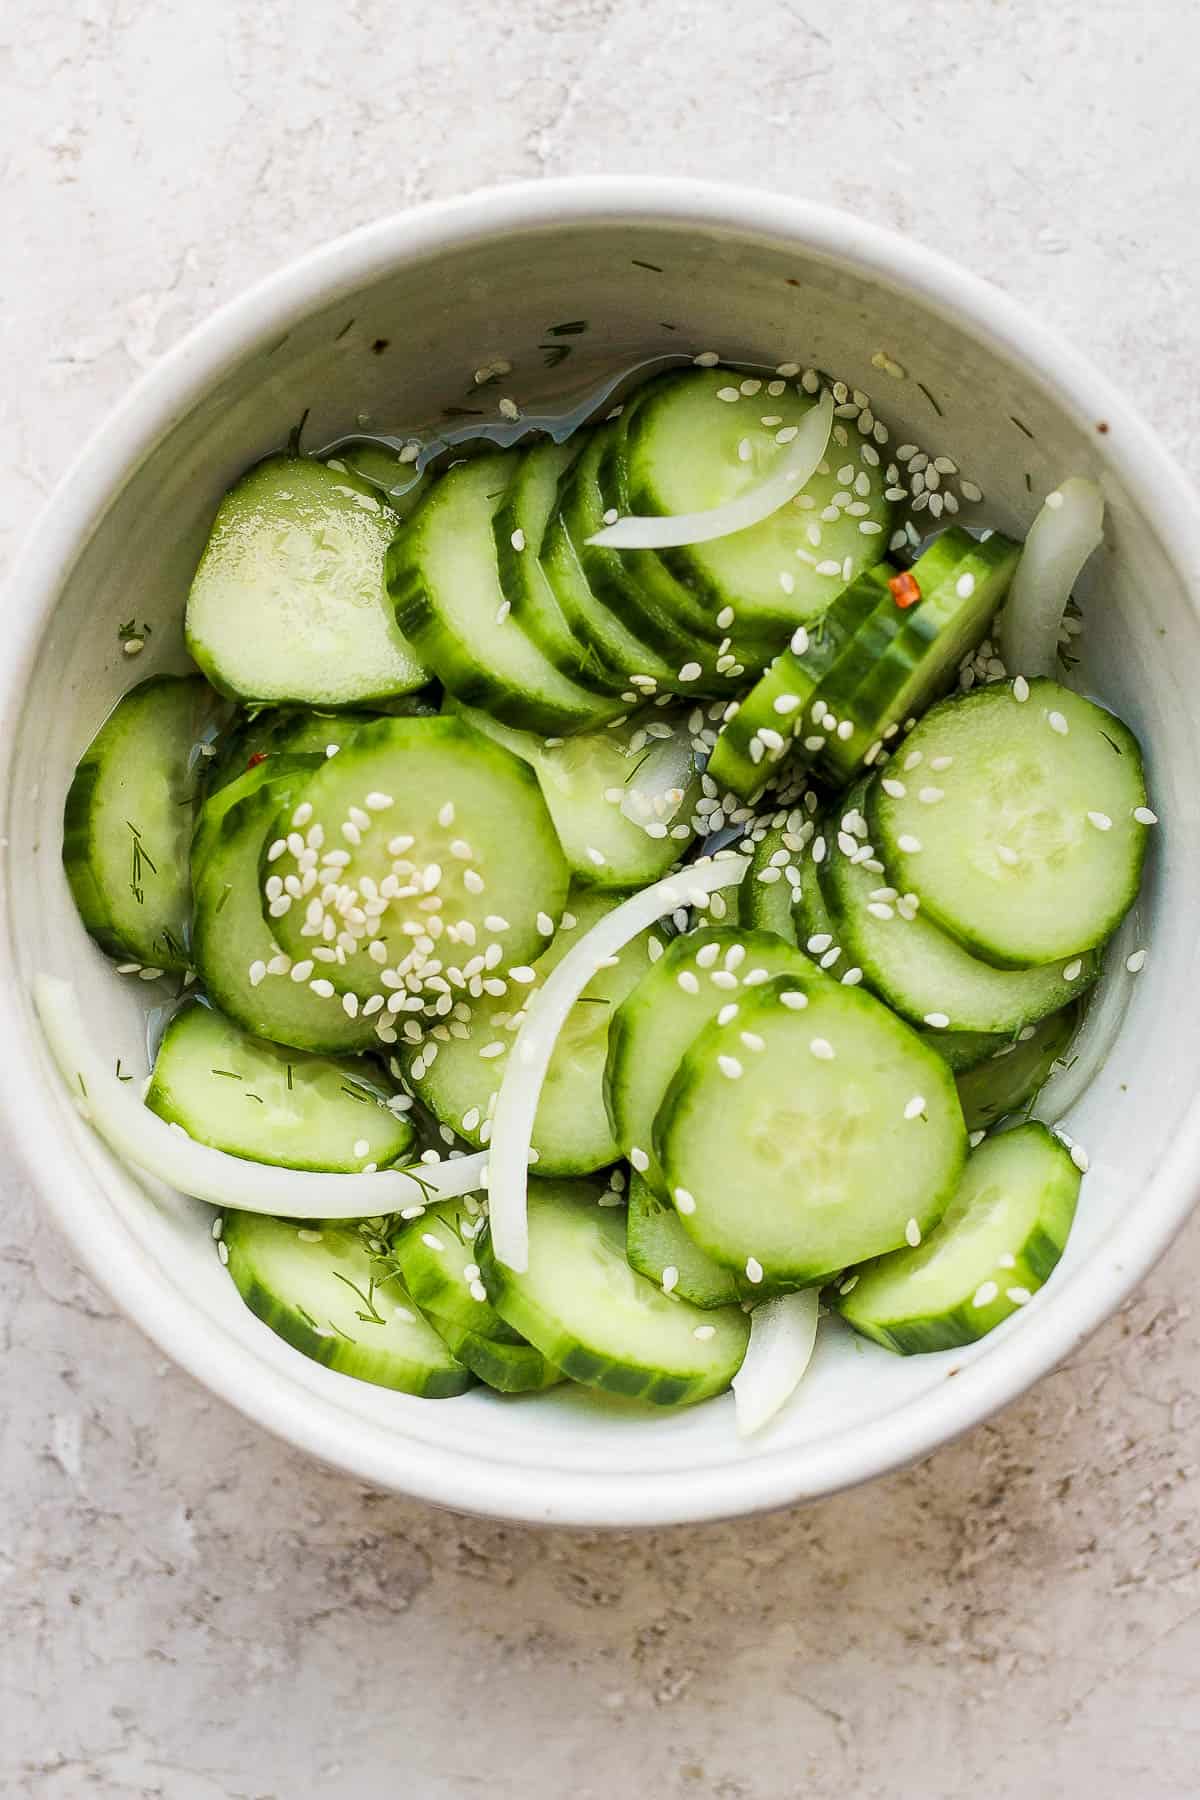 All of the marinated cucumber ingredients mixed together in a bowl.